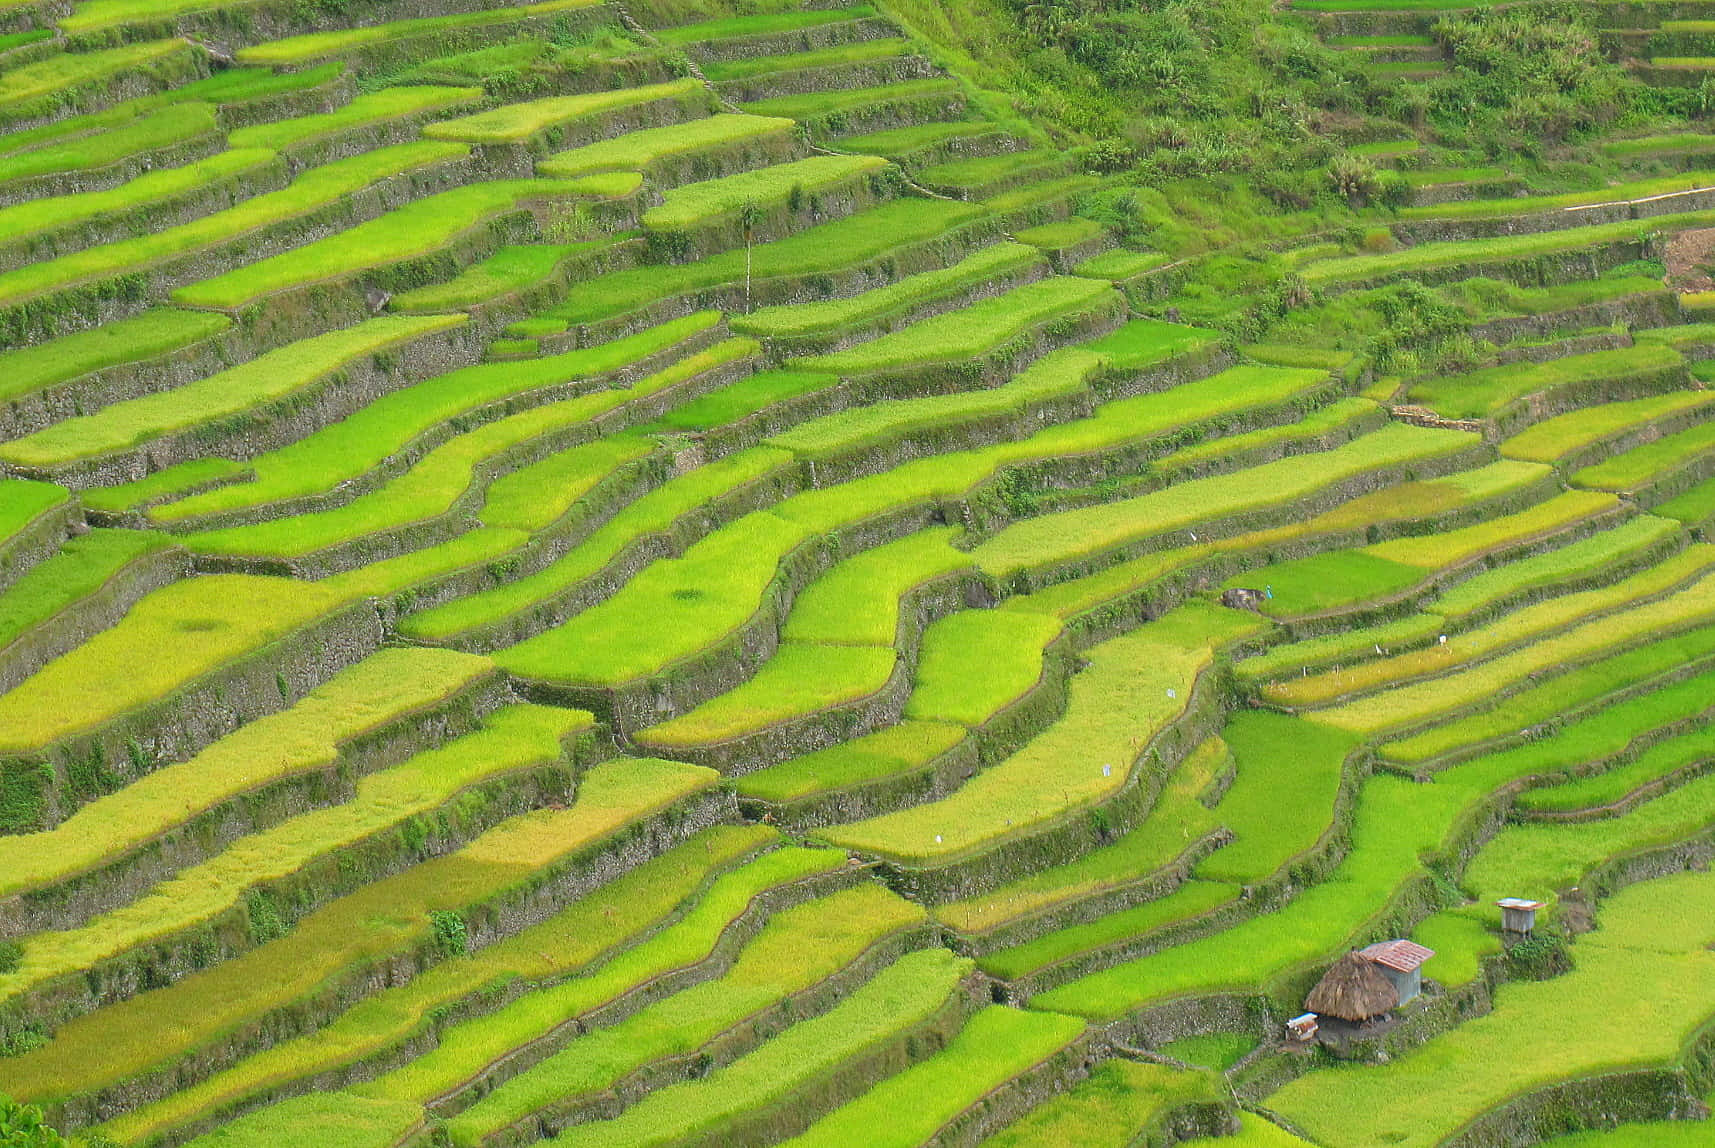 Banaue Rice Terraces In The Philippines Birds Eye View Shot Wallpaper